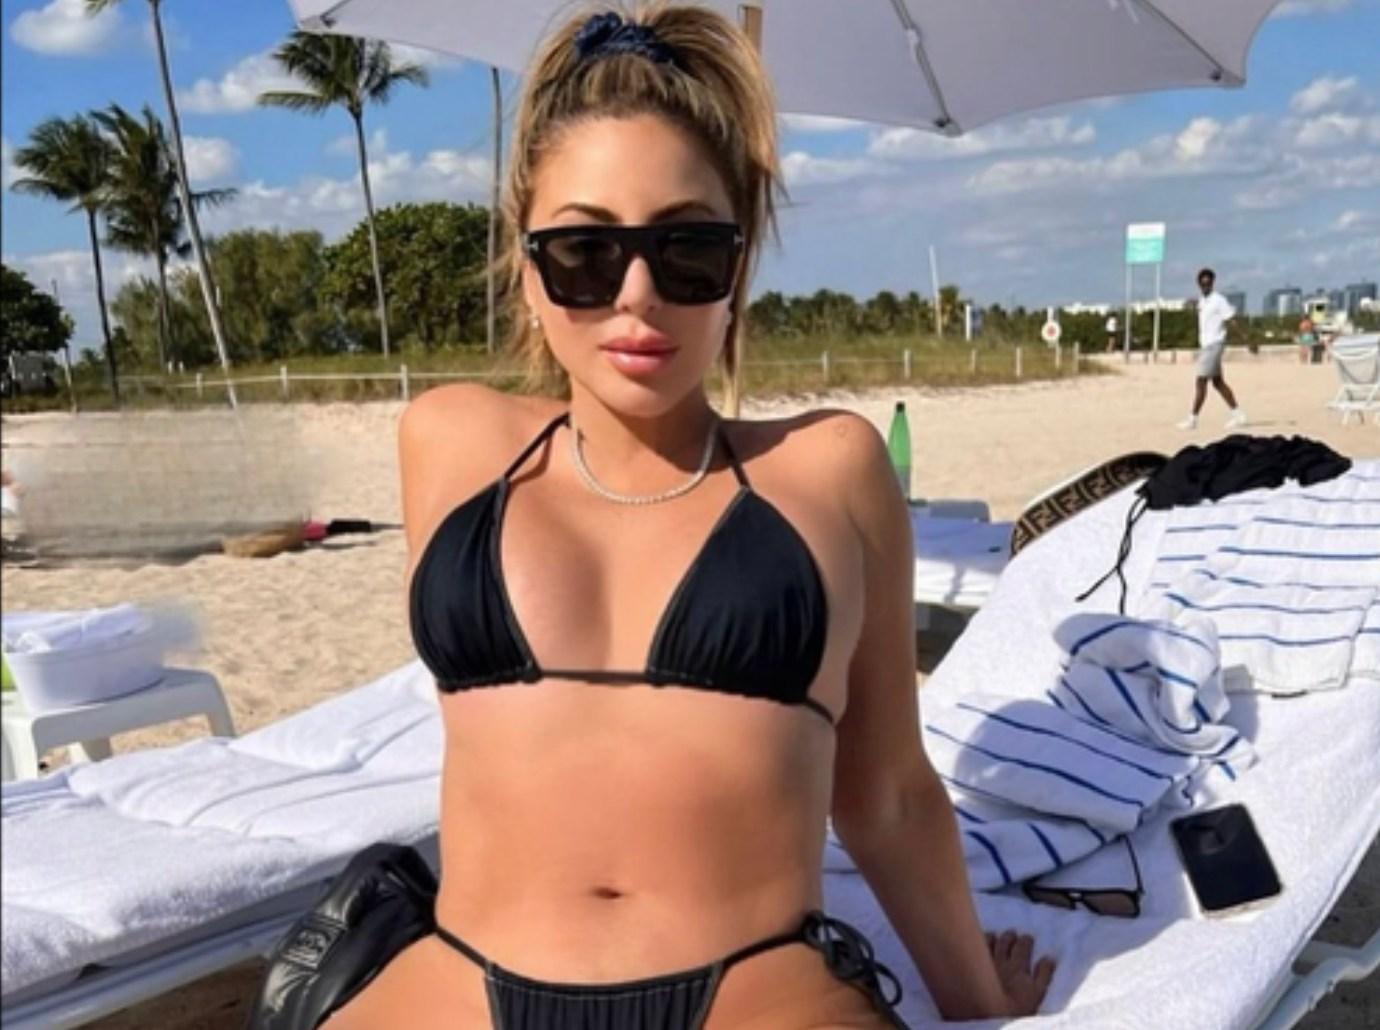 Larsa Pippen's bikini snap sparks outrage and an unexpected family